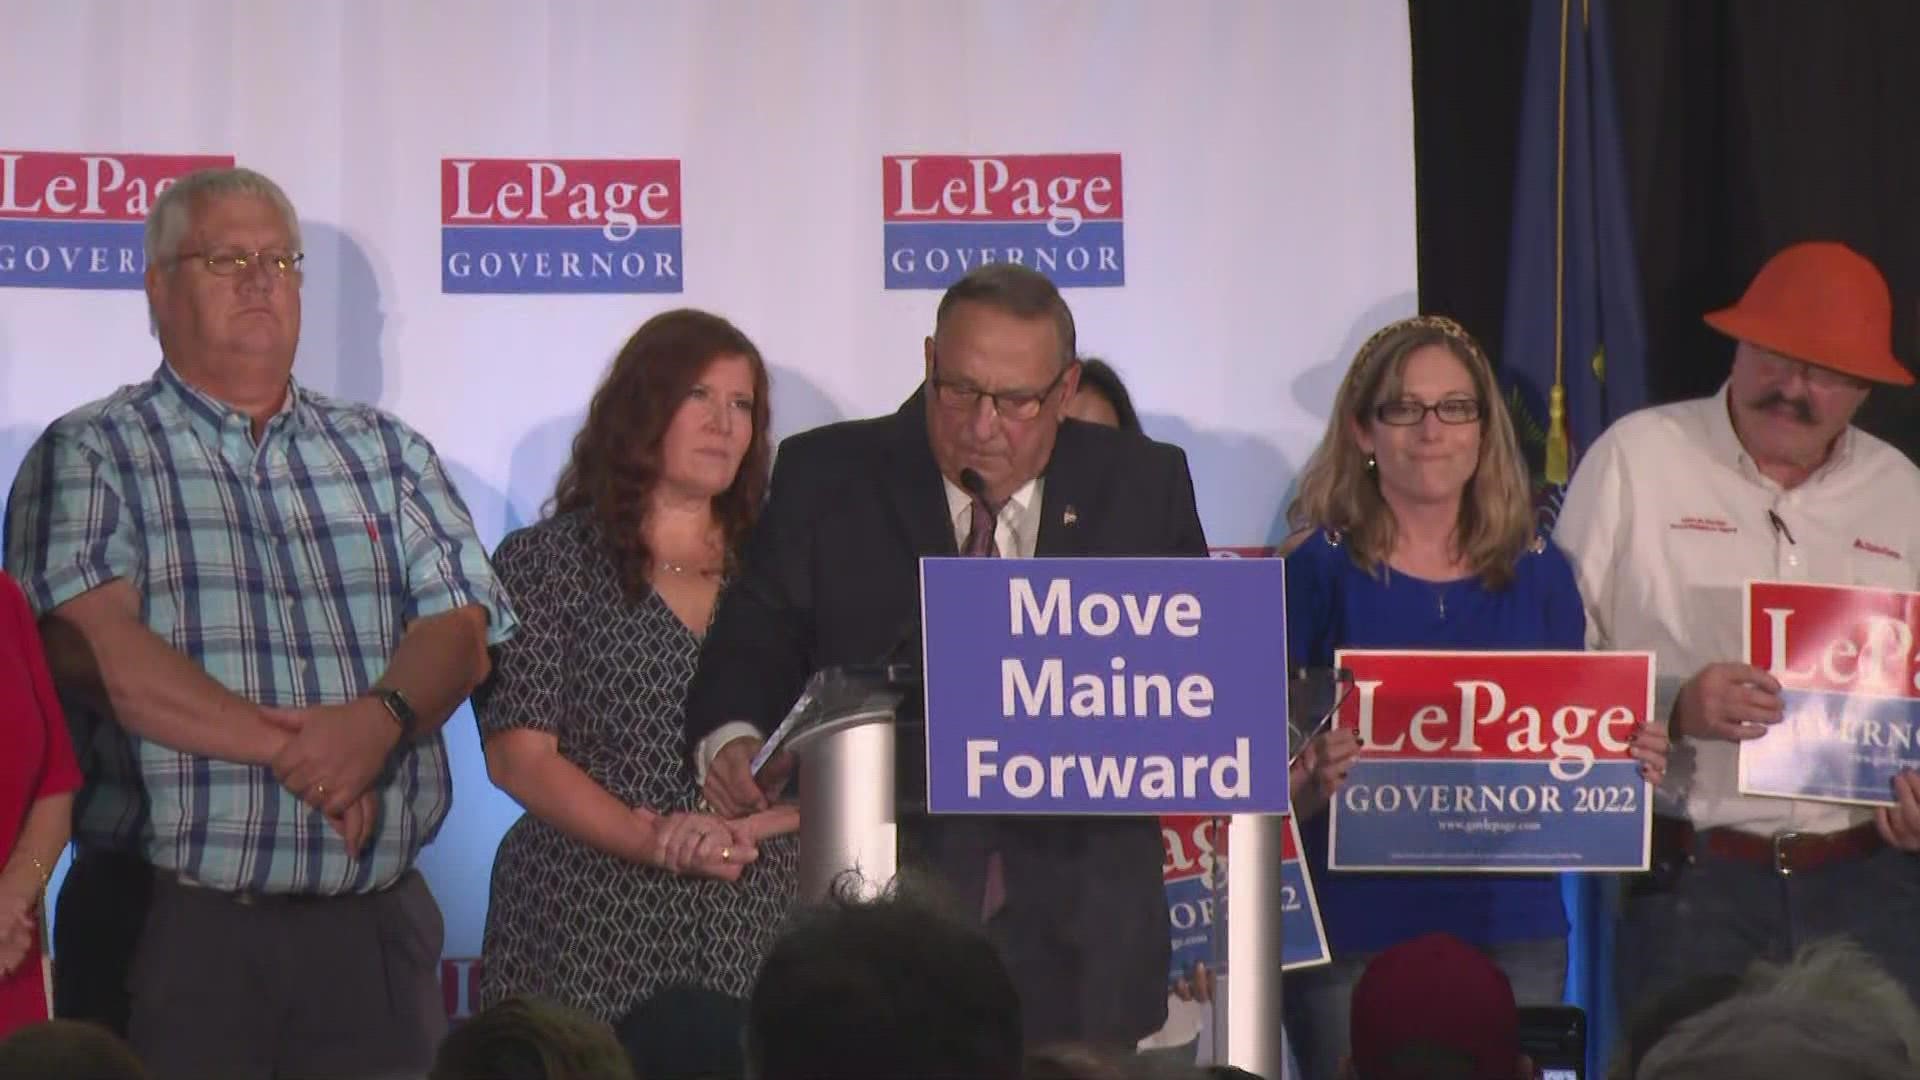 Fellow Republican, Susan Collins, announced her endorsement of LePage shortly after.